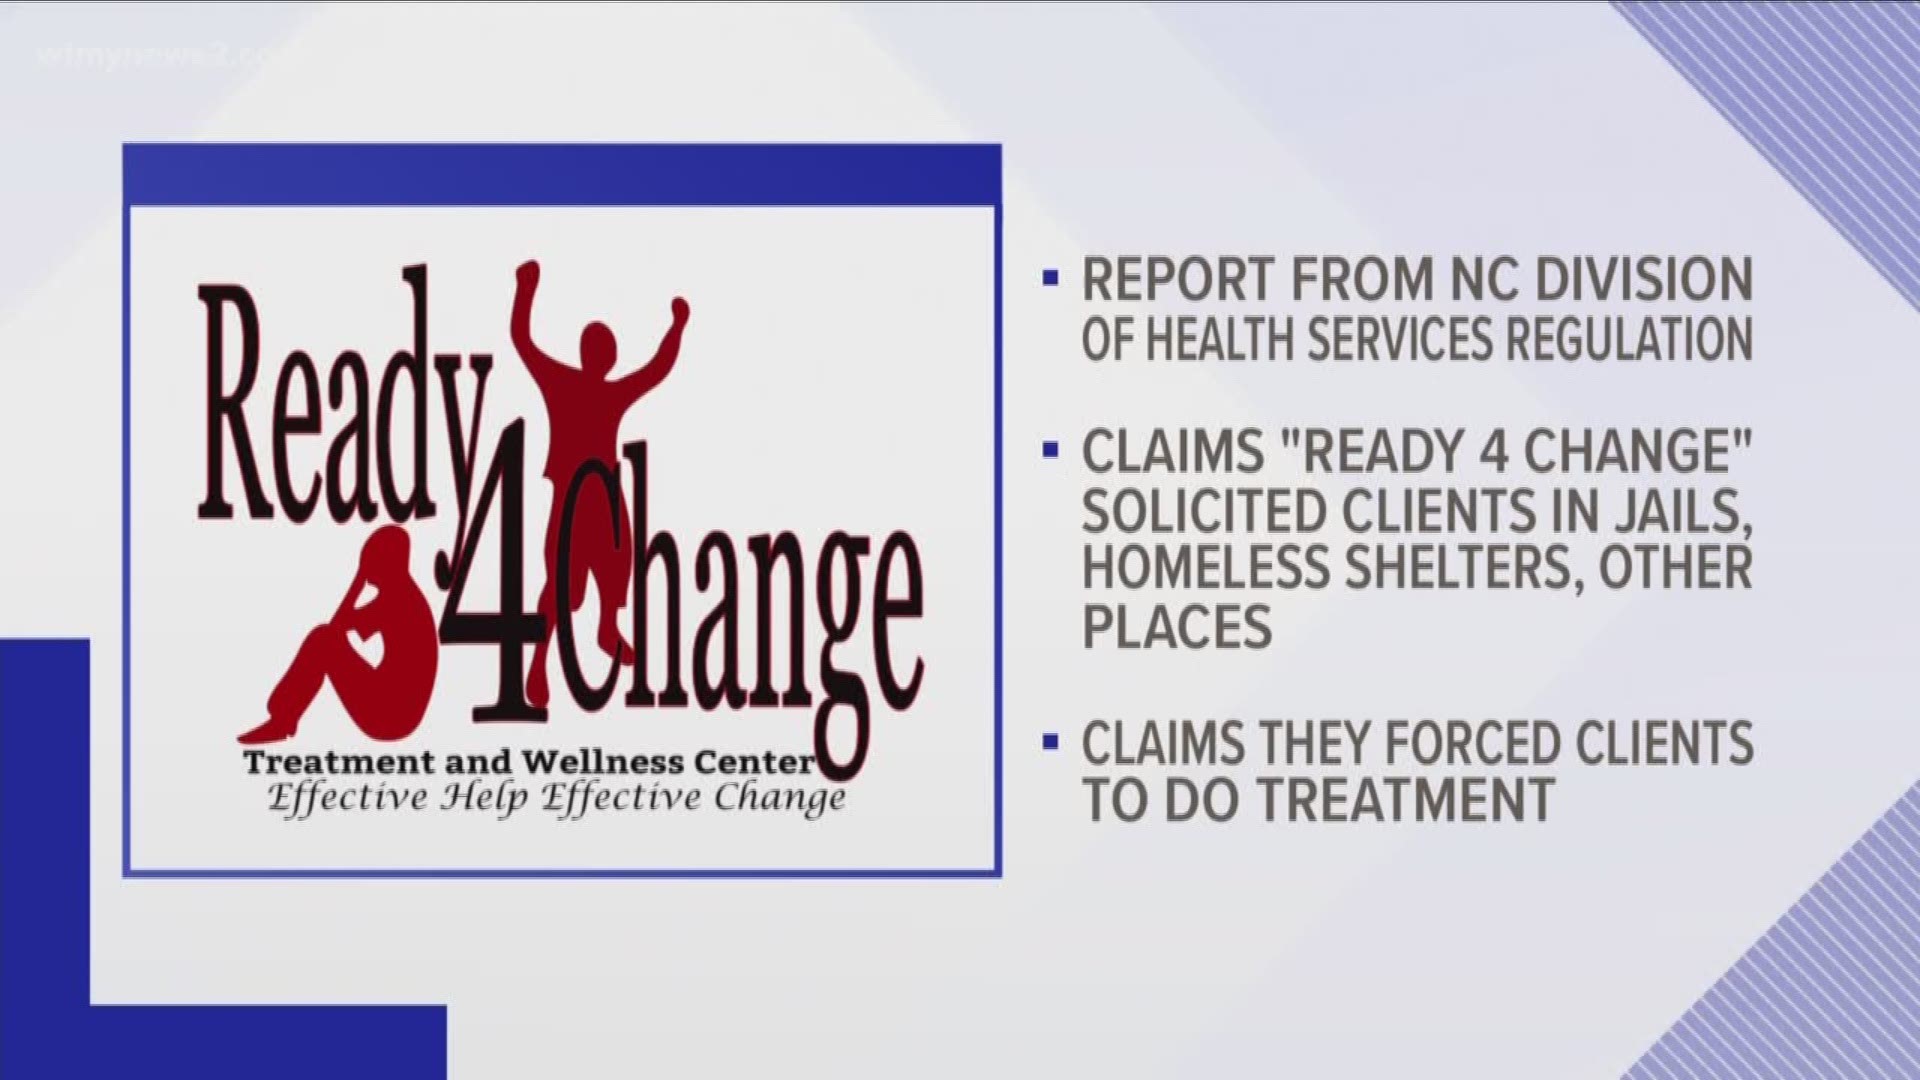 A Greensboro substance abuse agency is losing its license. The state claims it endangered its clients.